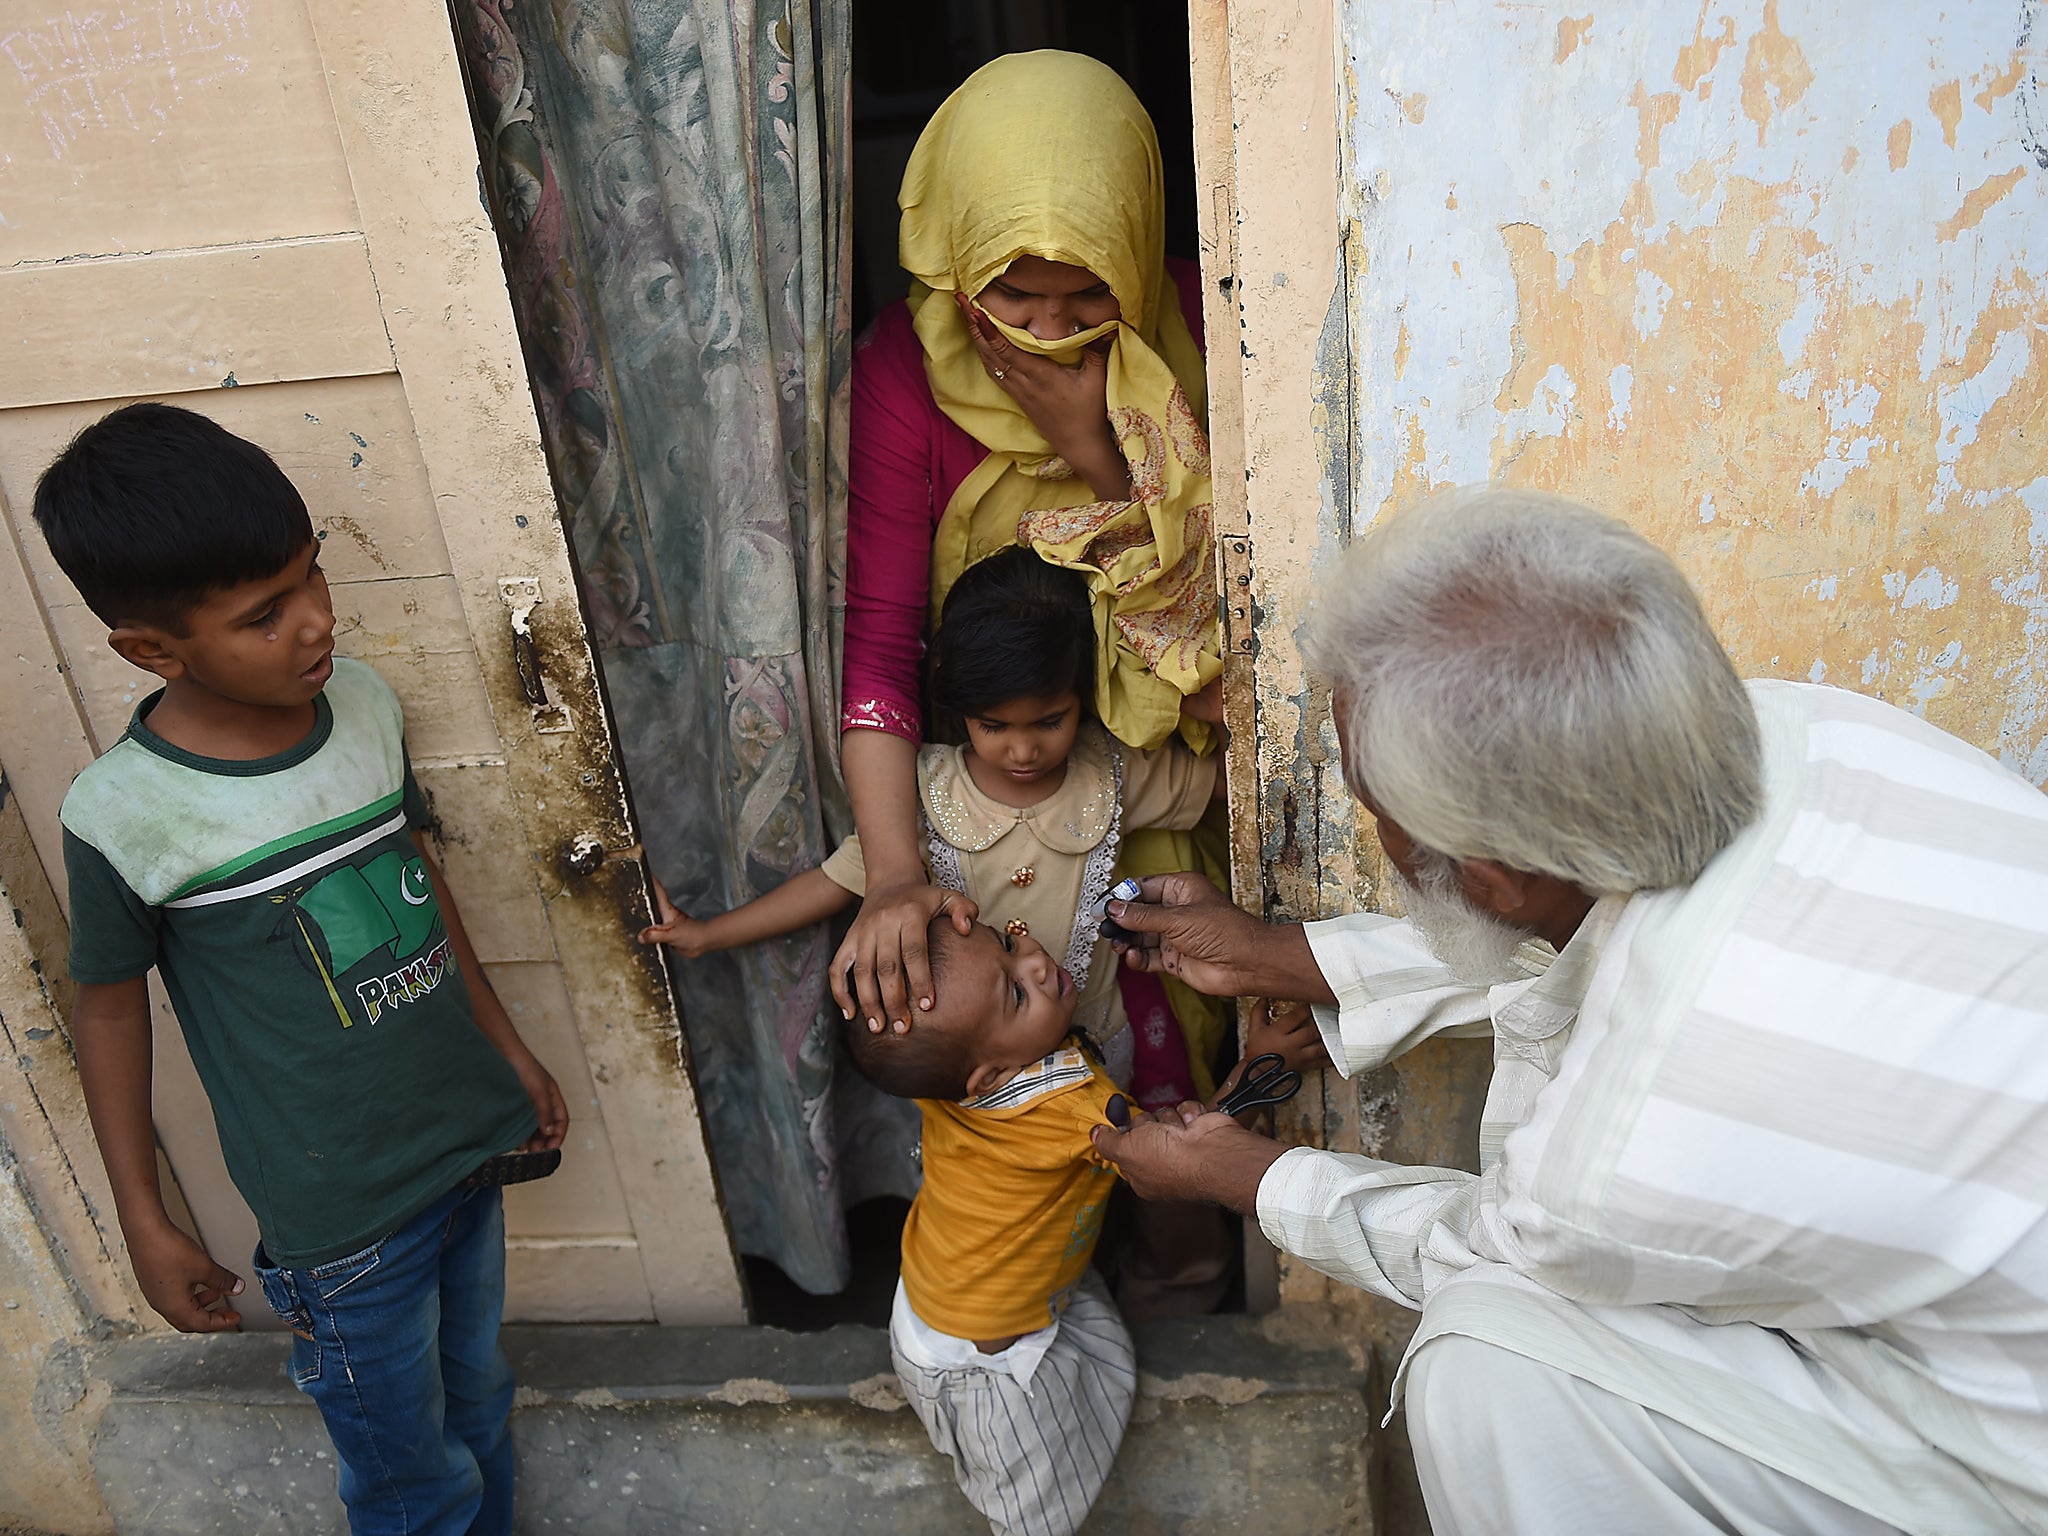 It is feared that health services in the most vulnerable countries will suffer if polio is eradicated